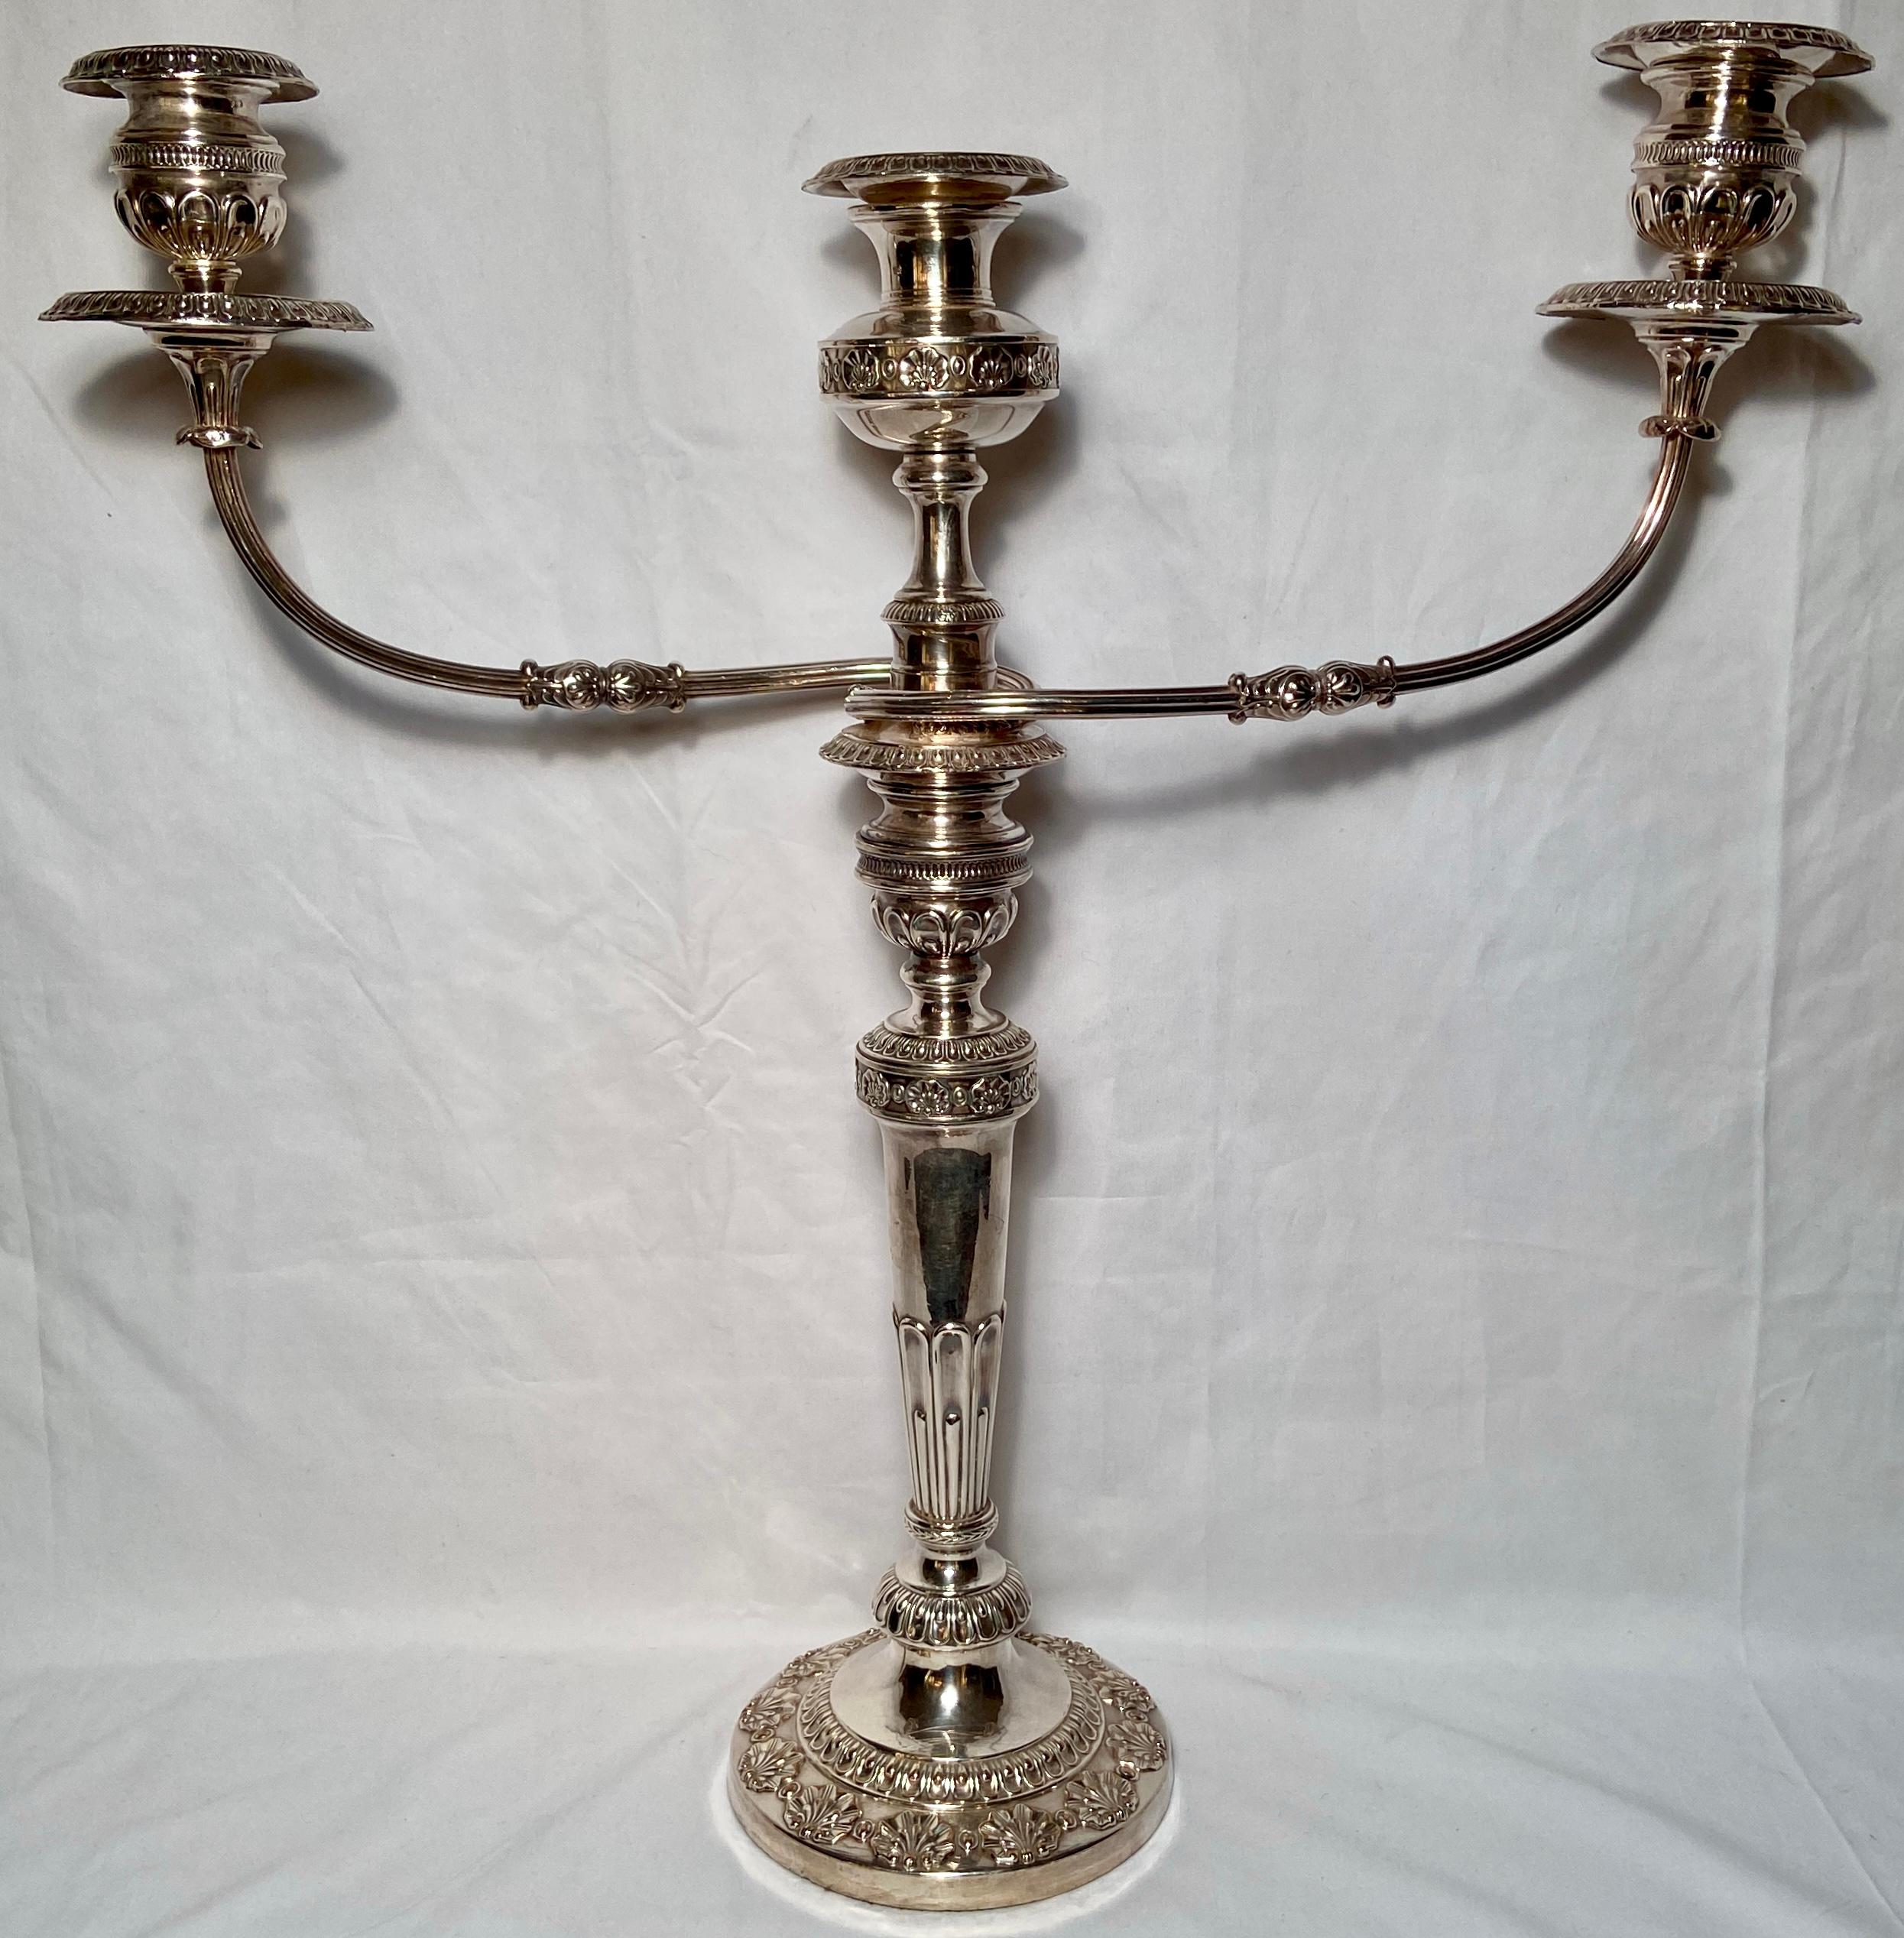 Pair large Antique Sheffield silver-plated convertible candelabra, Circa 1880-1890. Converts from 3 cup candelabra to single cup candlesticks.